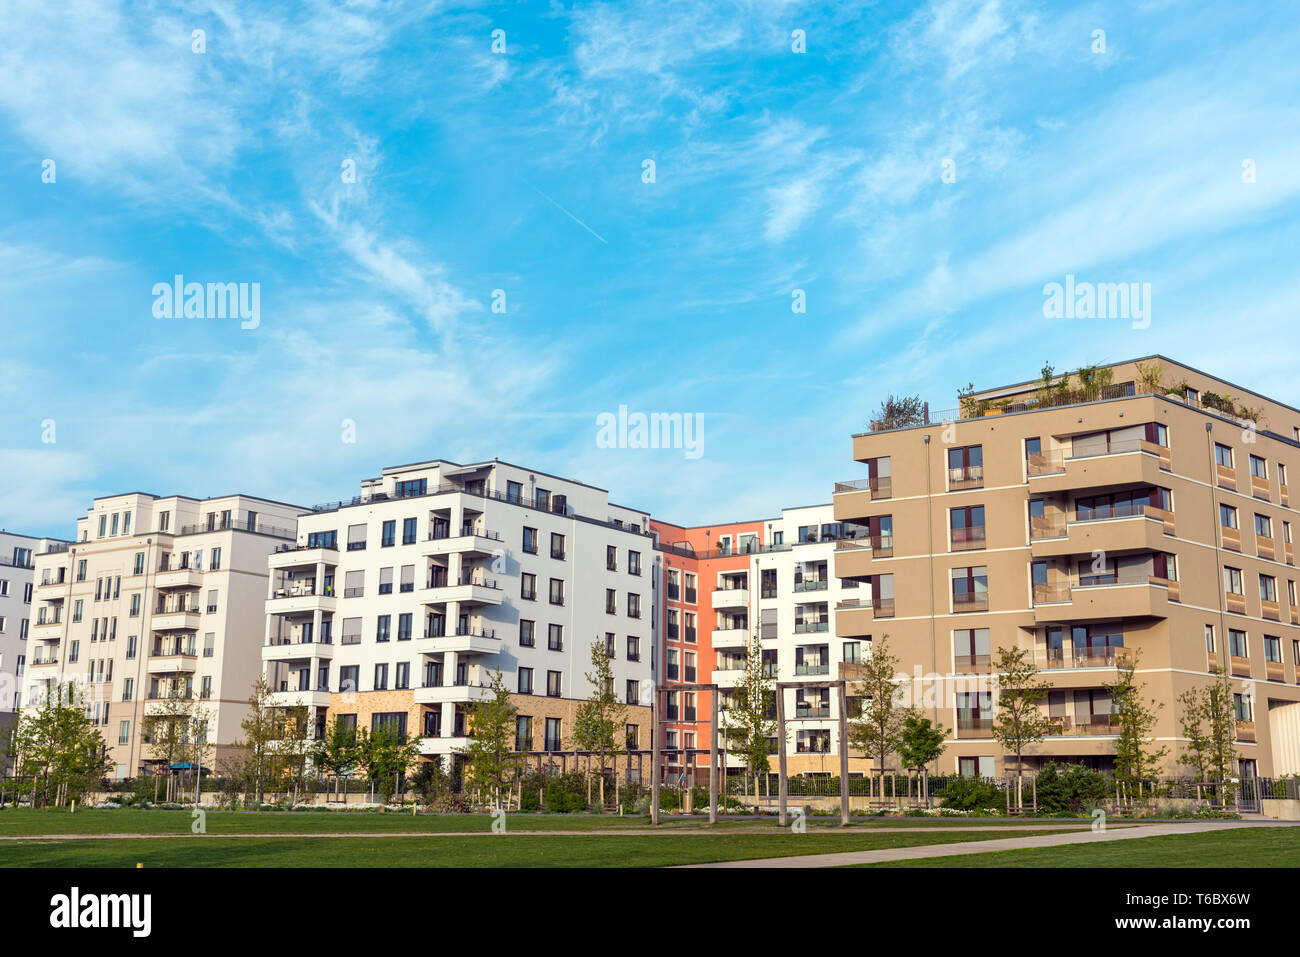 Development area with modern multi-family houses seen in Berlin, Germany Stock Photo